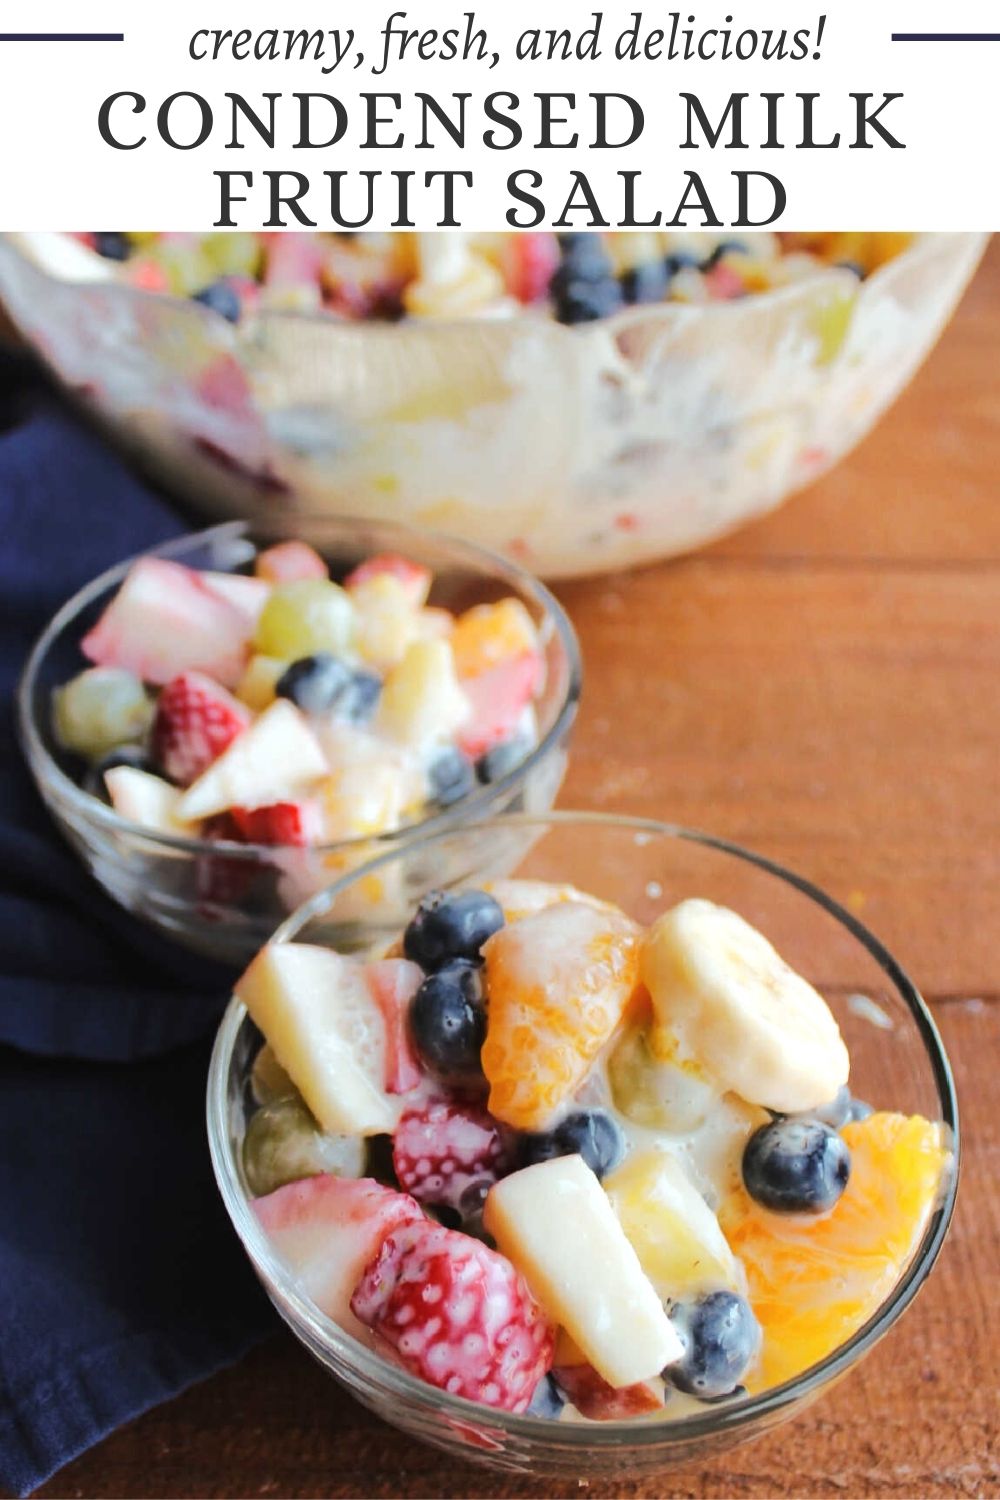 This fresh fruit salad is loaded with all kinds of fruit. The condensed milk brings it together in a creamy treat that makes it perfect with breakfast, as a simple side dish, or as a lighter dessert.